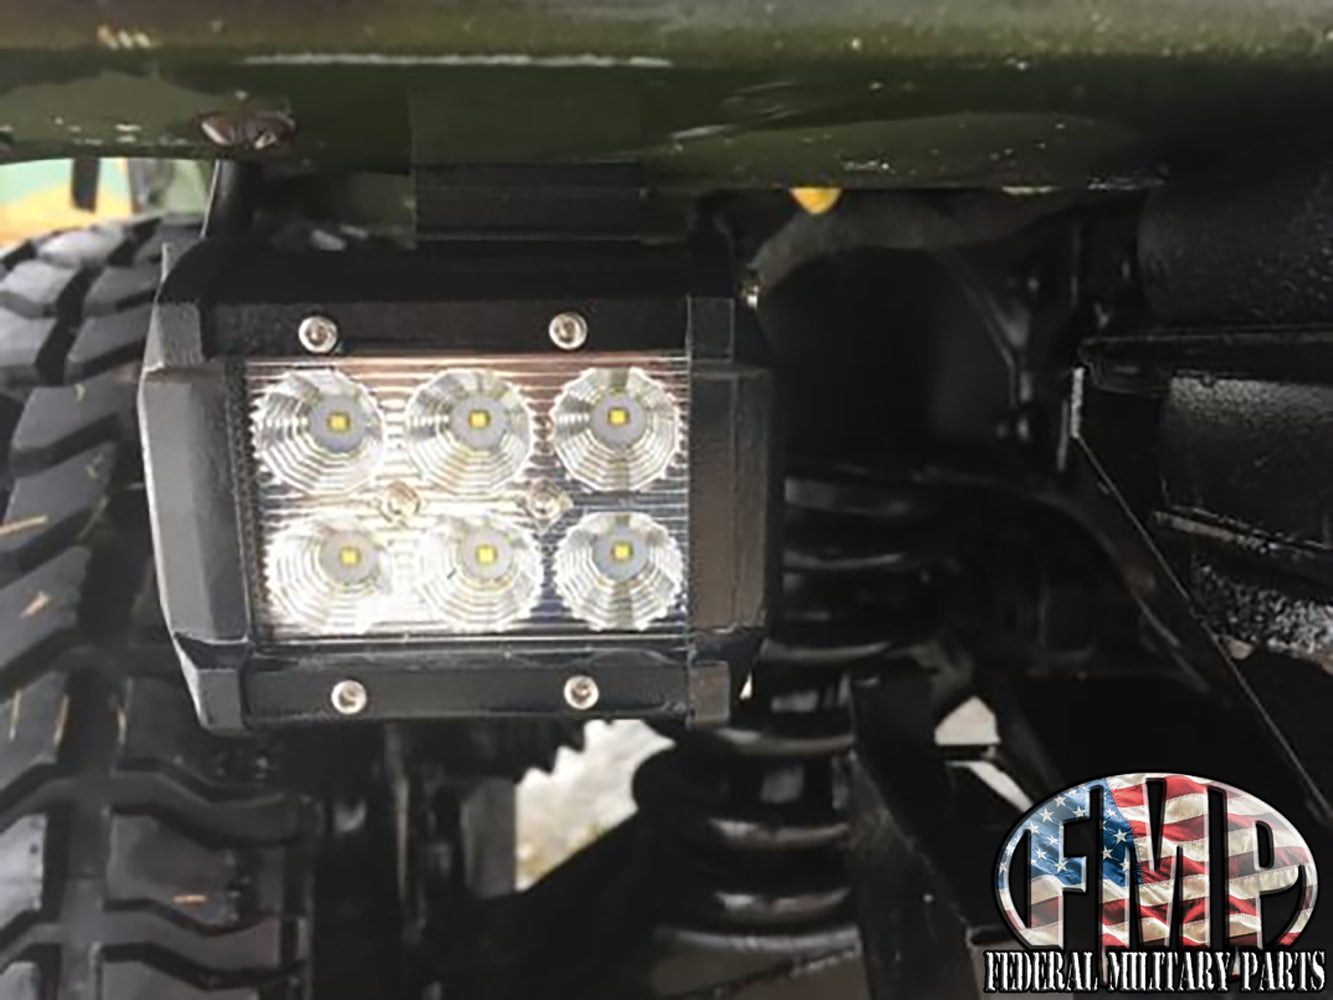  Blackout Light 24V- Fits all US Military Vehicles Using  Blackout Drive Light Including M998 Humvee, Green : Health & Household